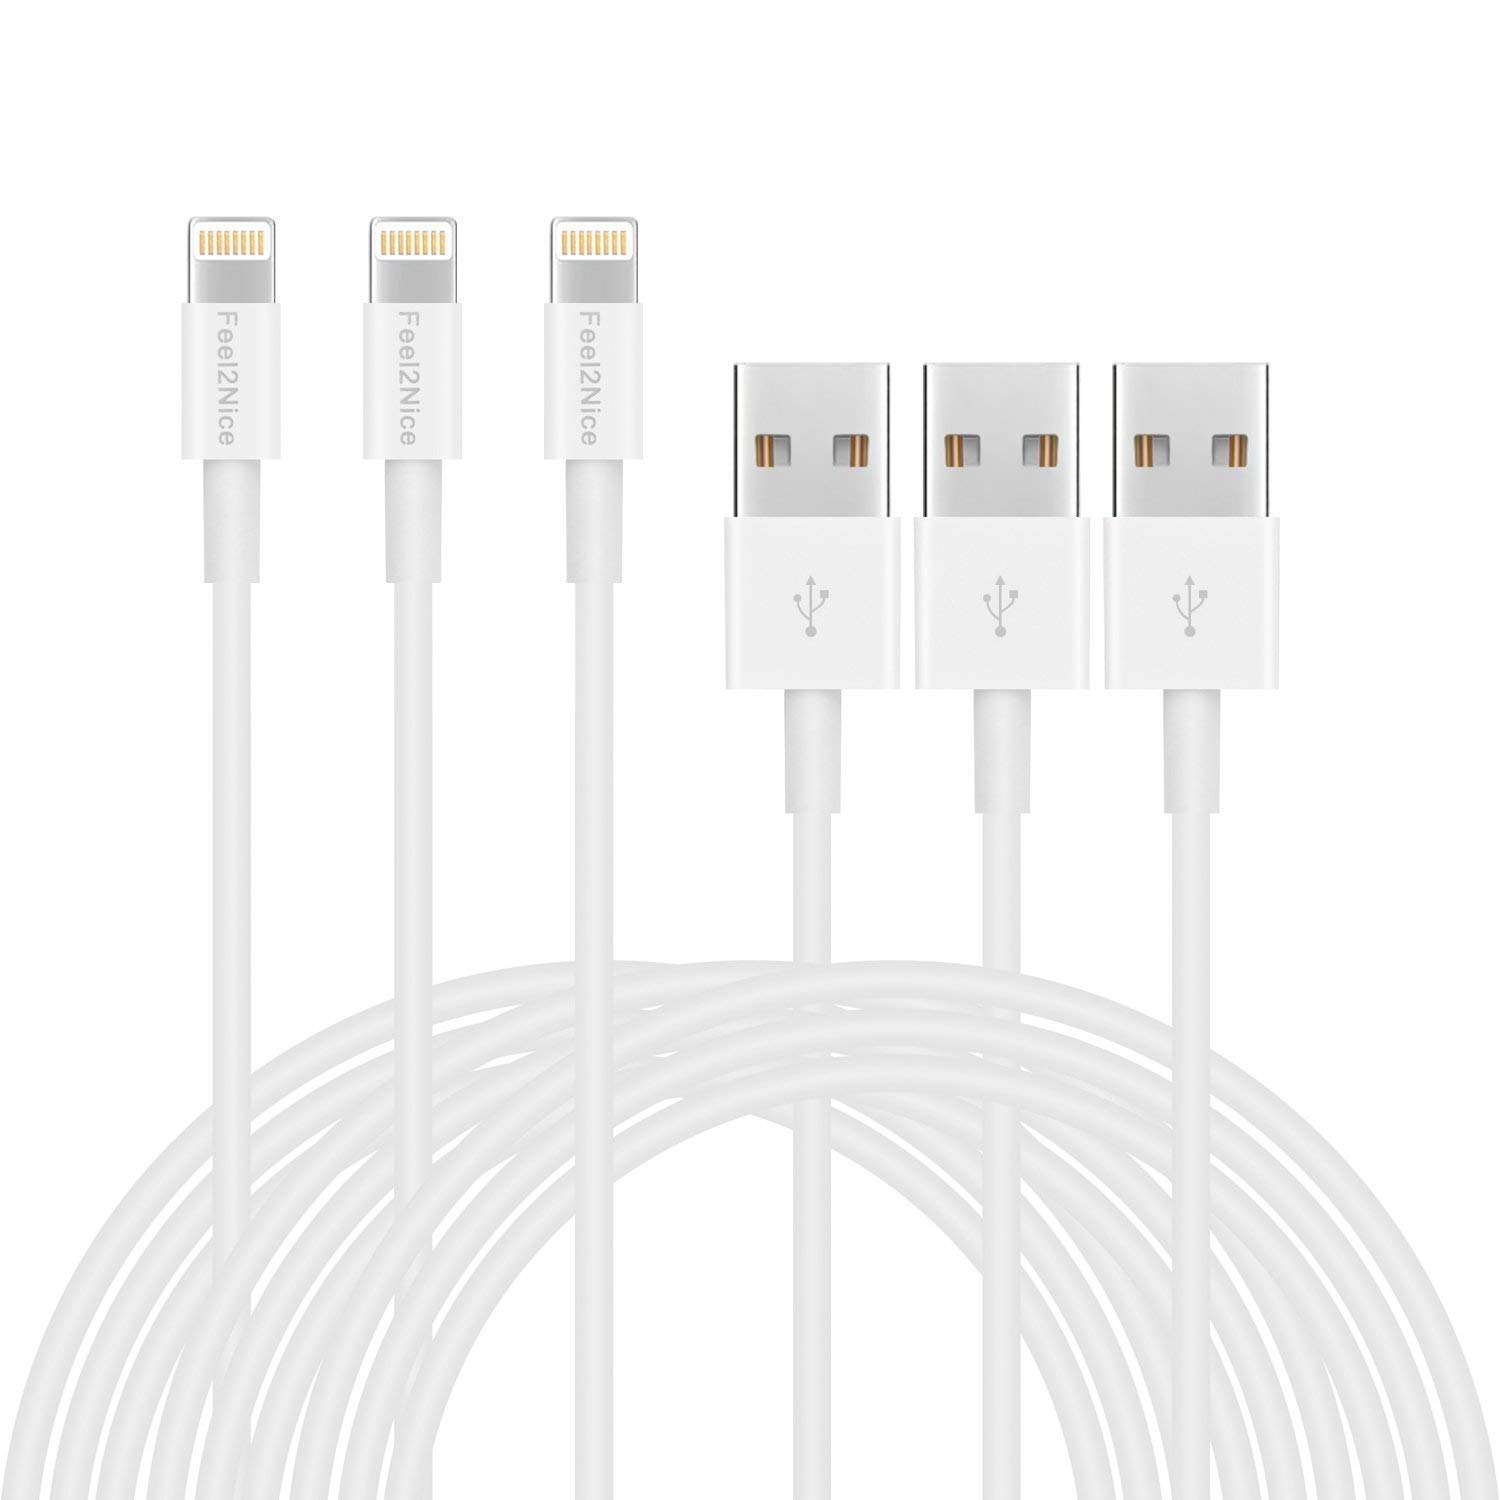 iPhone Charger Fast Charging[Apple MFi Certified] 5pack 10FT Long Lightning Cable Fast High Speed Data Sync iPhone Charger Cord for iPhone 14/13/12/11 Pro Max/XS MAX/XR/XS/X/8/7/Plus airpods (White)